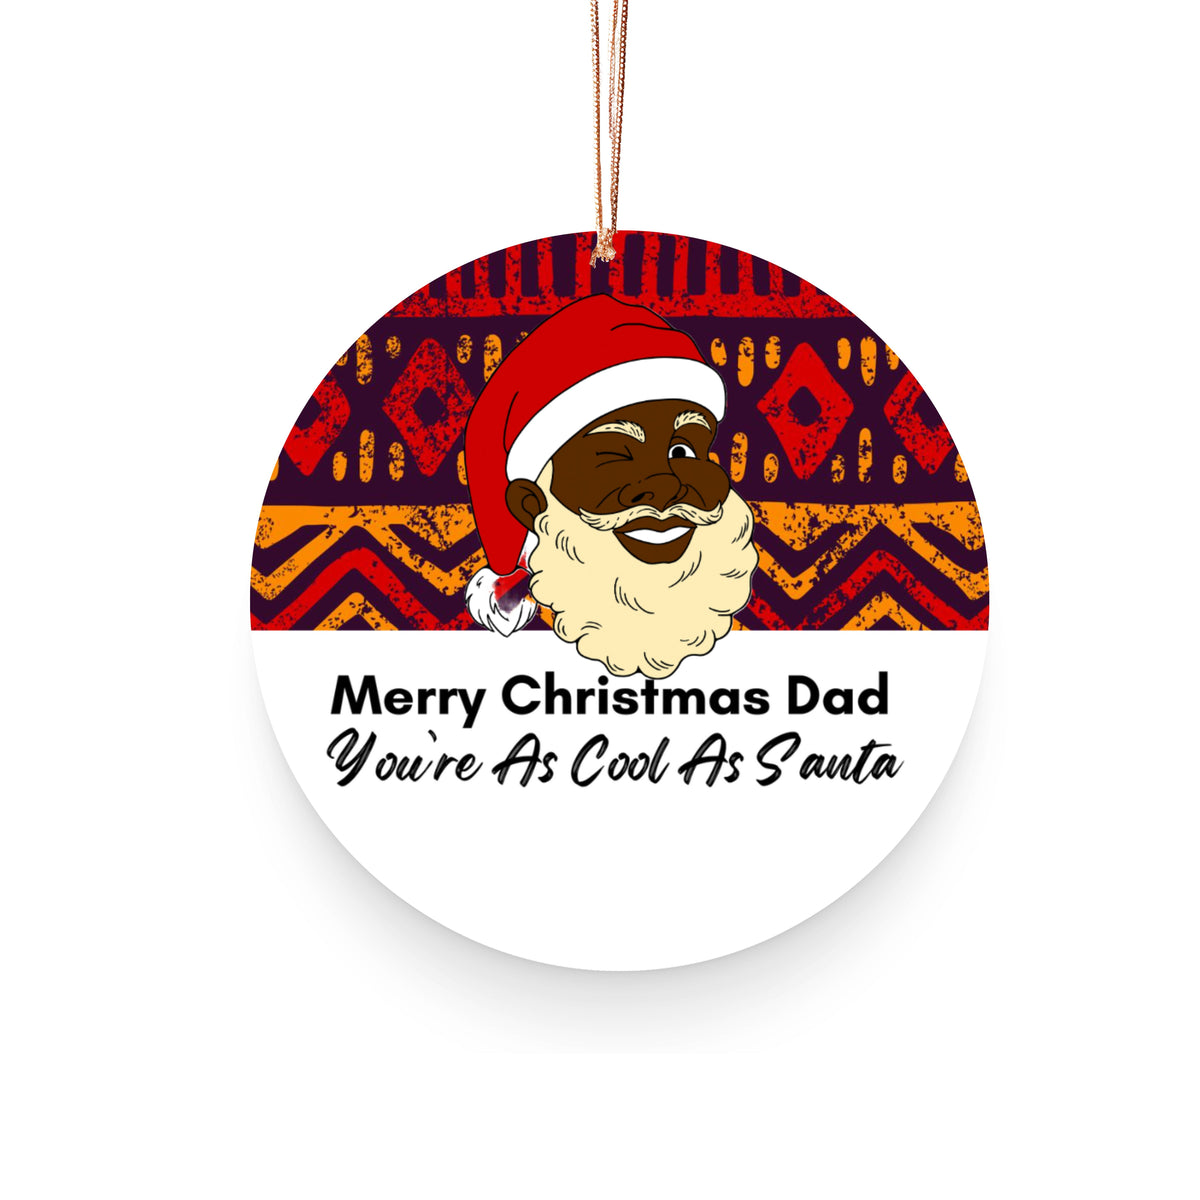 Christmas Ornament for Dads - African Print Inspired